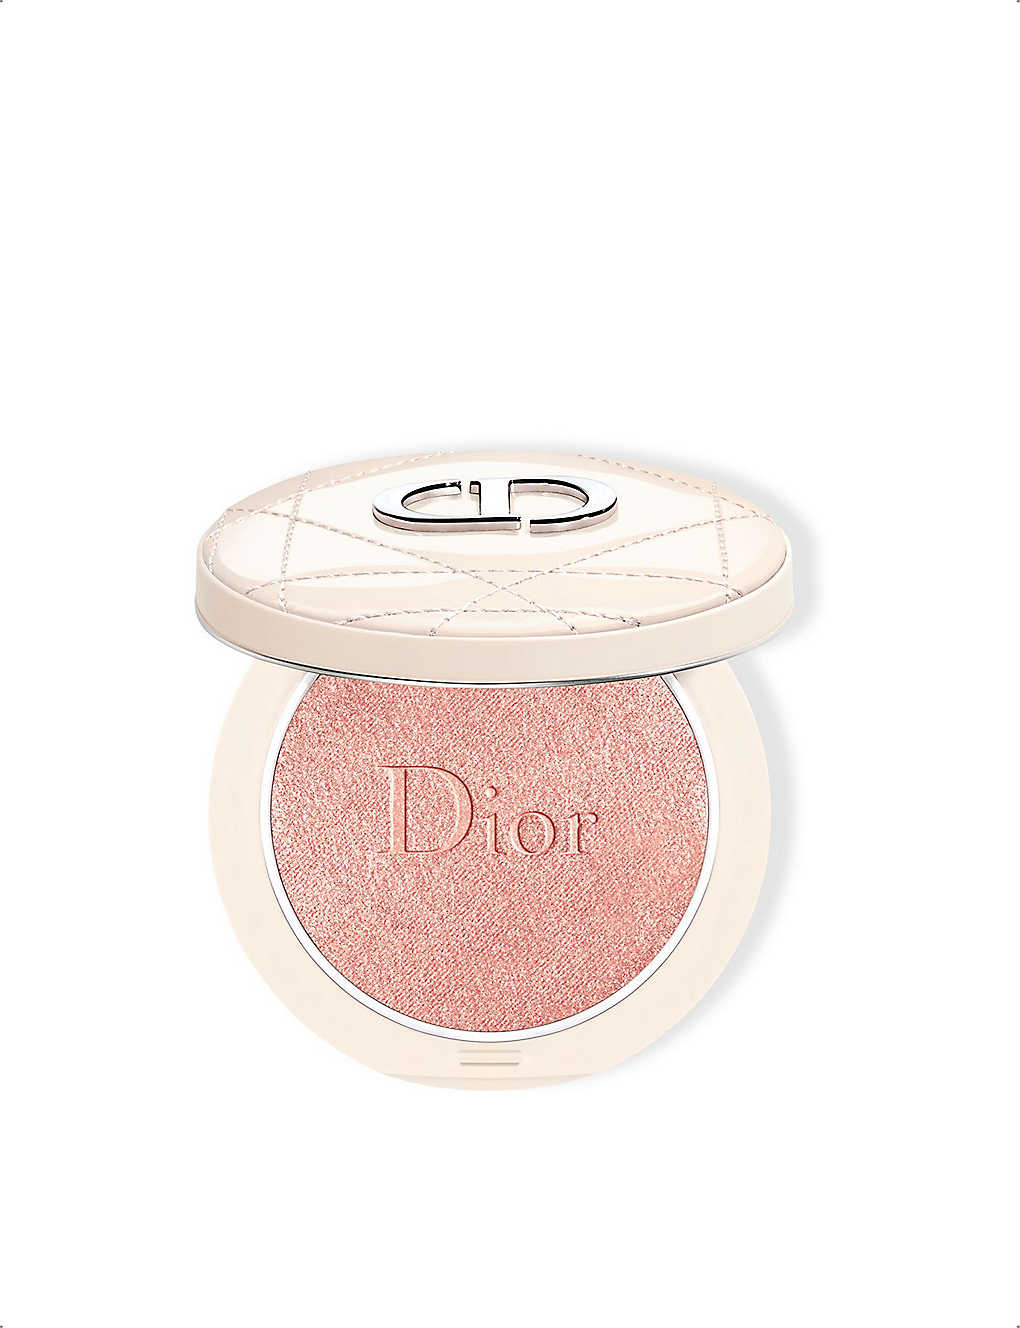 Dior Forever Couture Luminizer Longwear Highlighting Powder 6g In 006